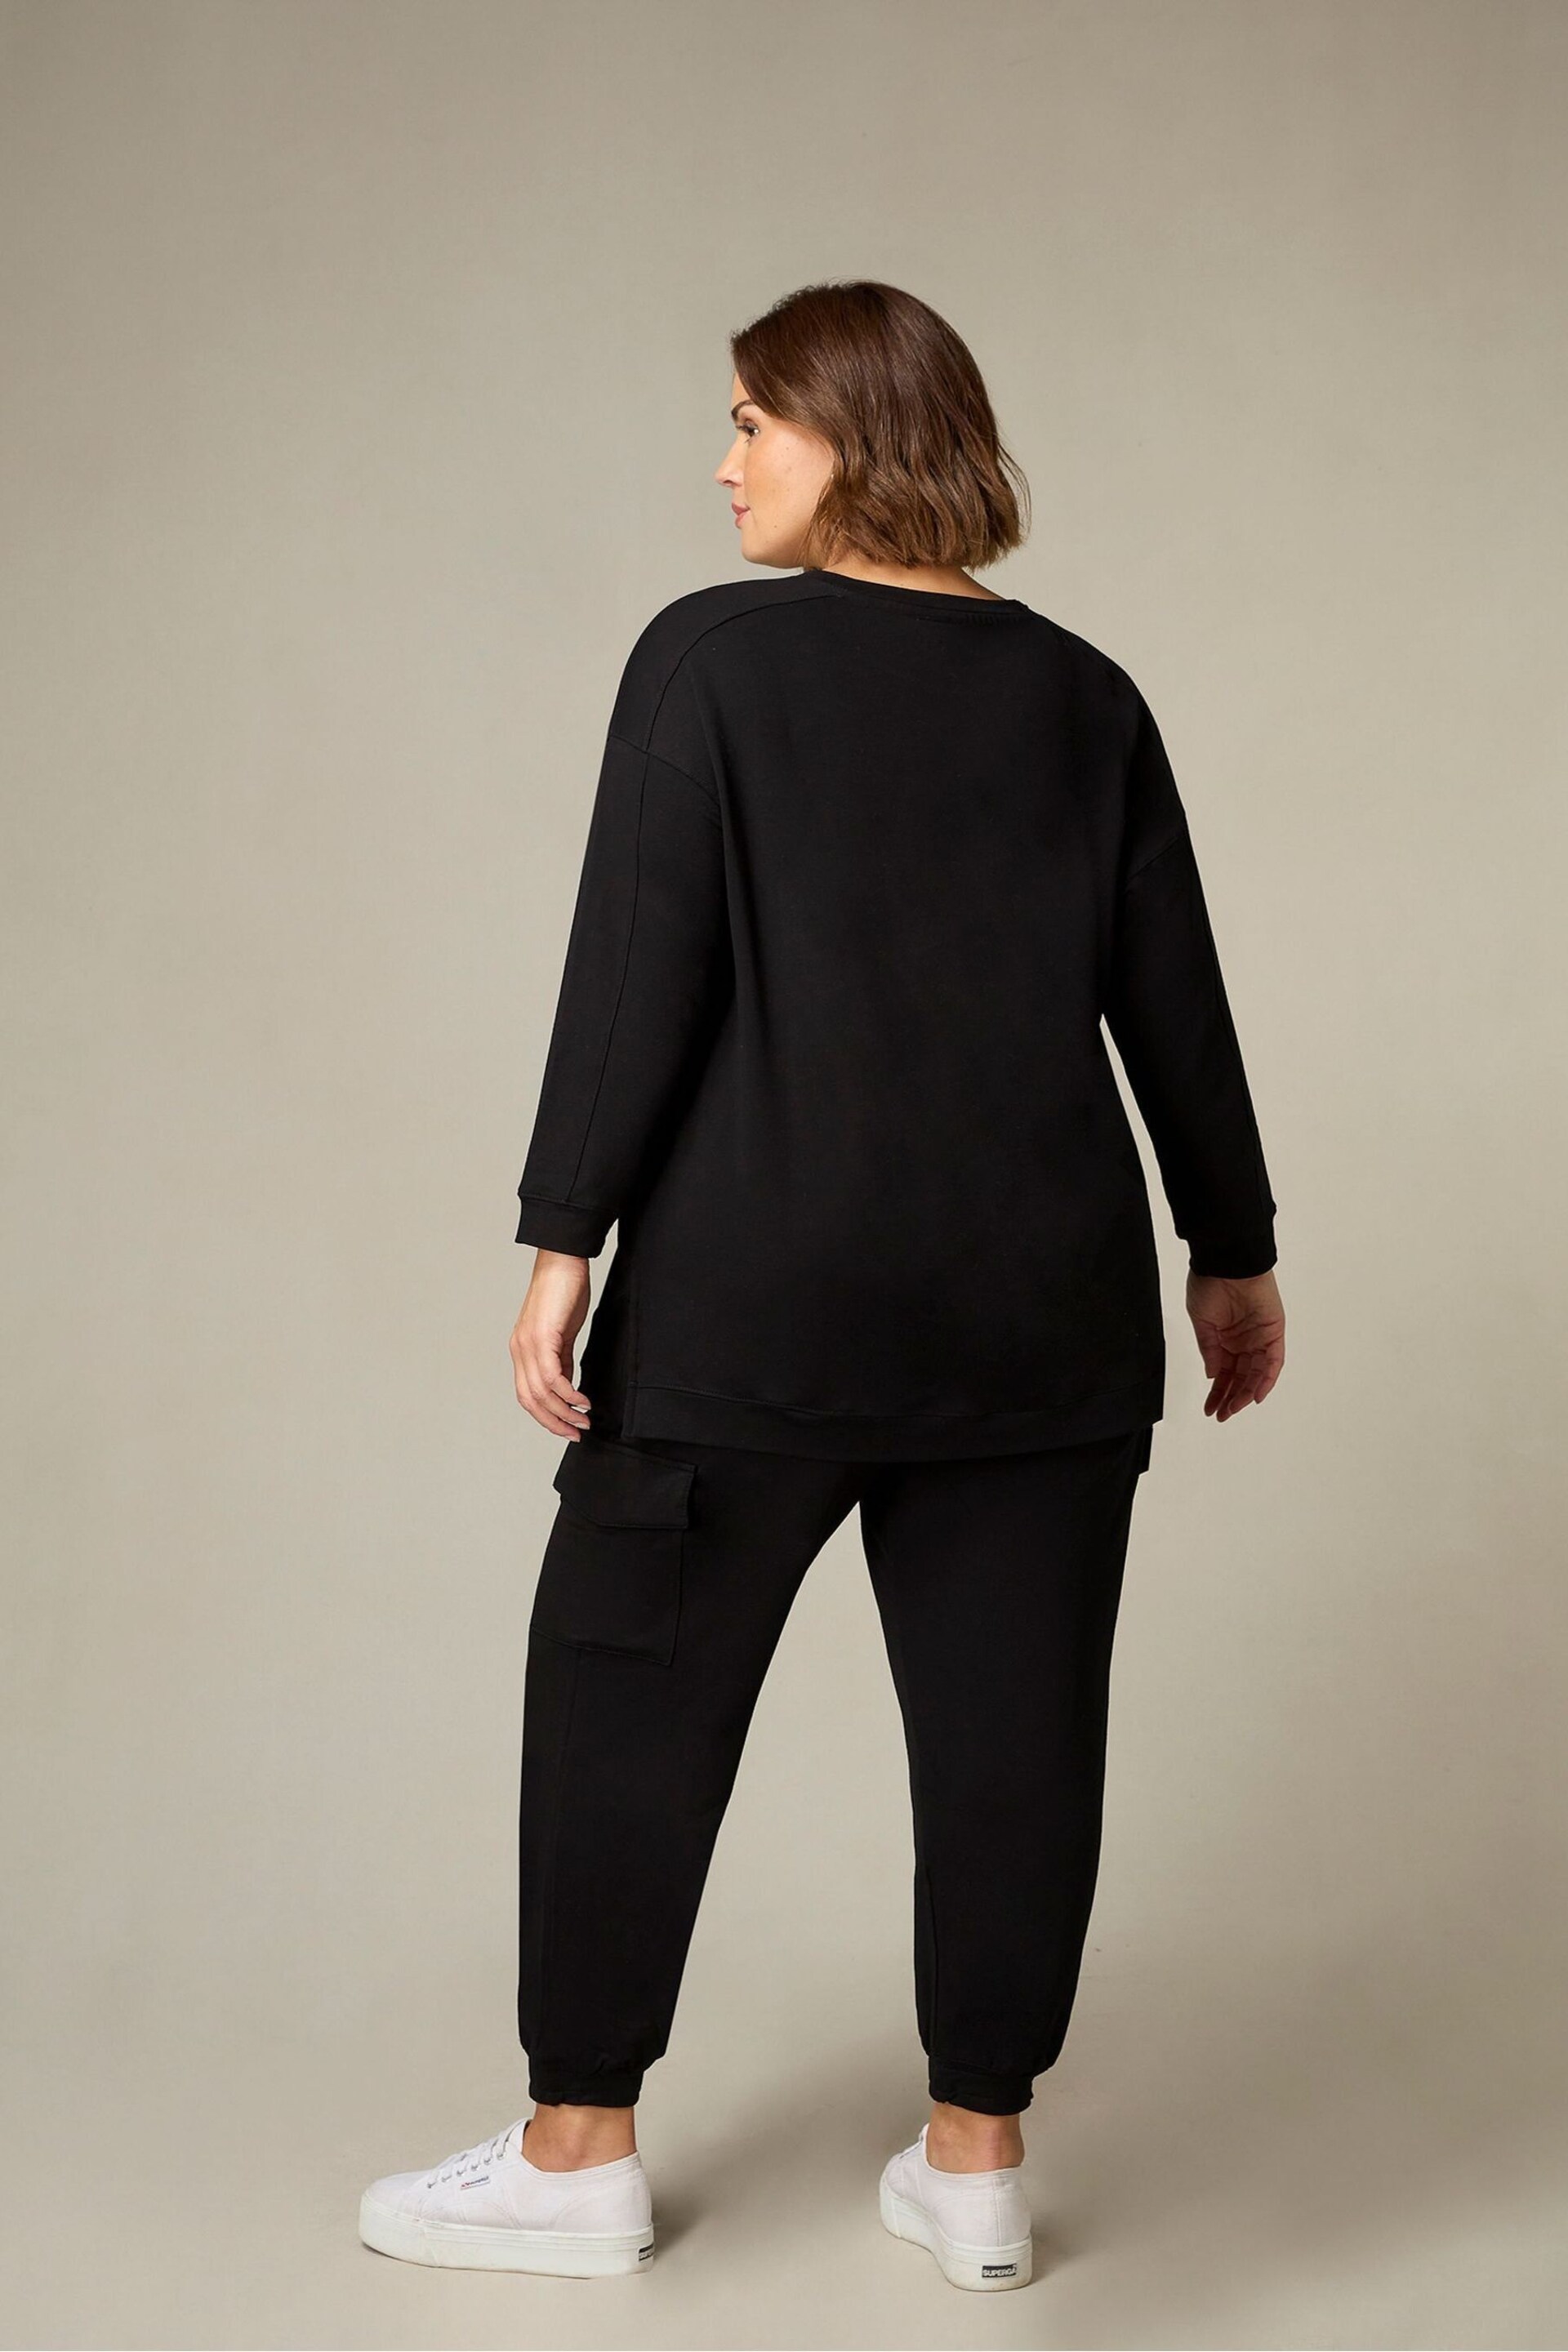 Live Unlimited Curve Jersey Cargo Black Trousers - Image 2 of 4